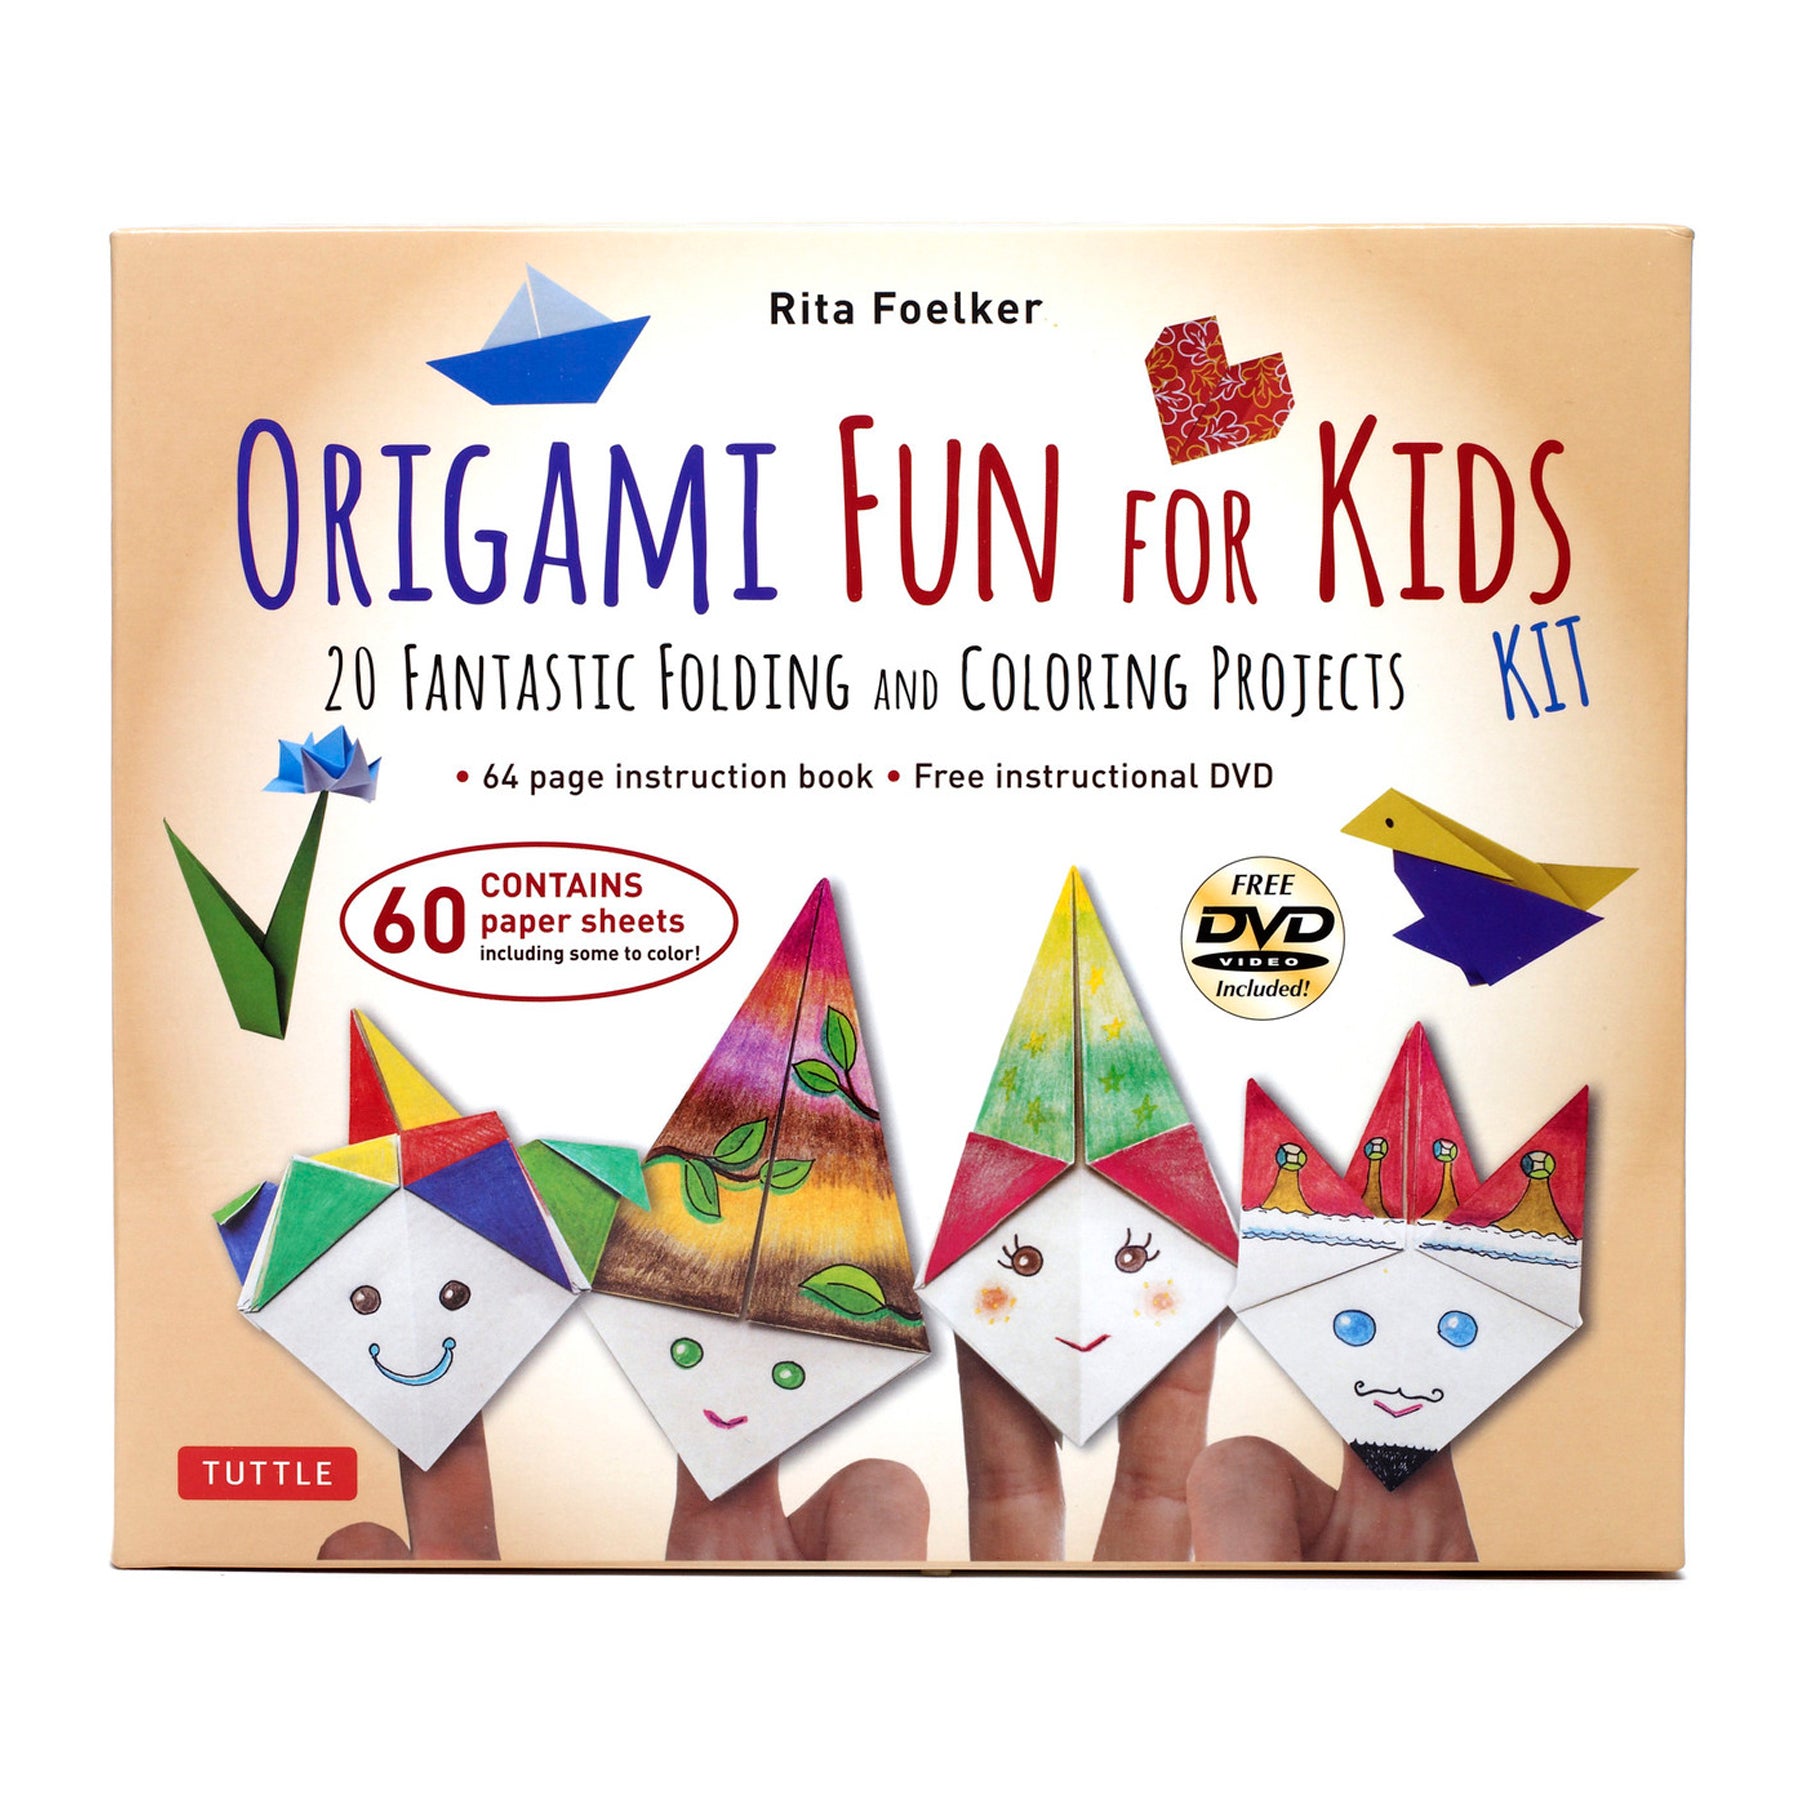 Origami Fun for Kids Kit: 20 Fantastic Folding and Coloring Projects: Kit with Origami Book, Fun & Easy Projects, 60 Origami Papers and Instructional DVD